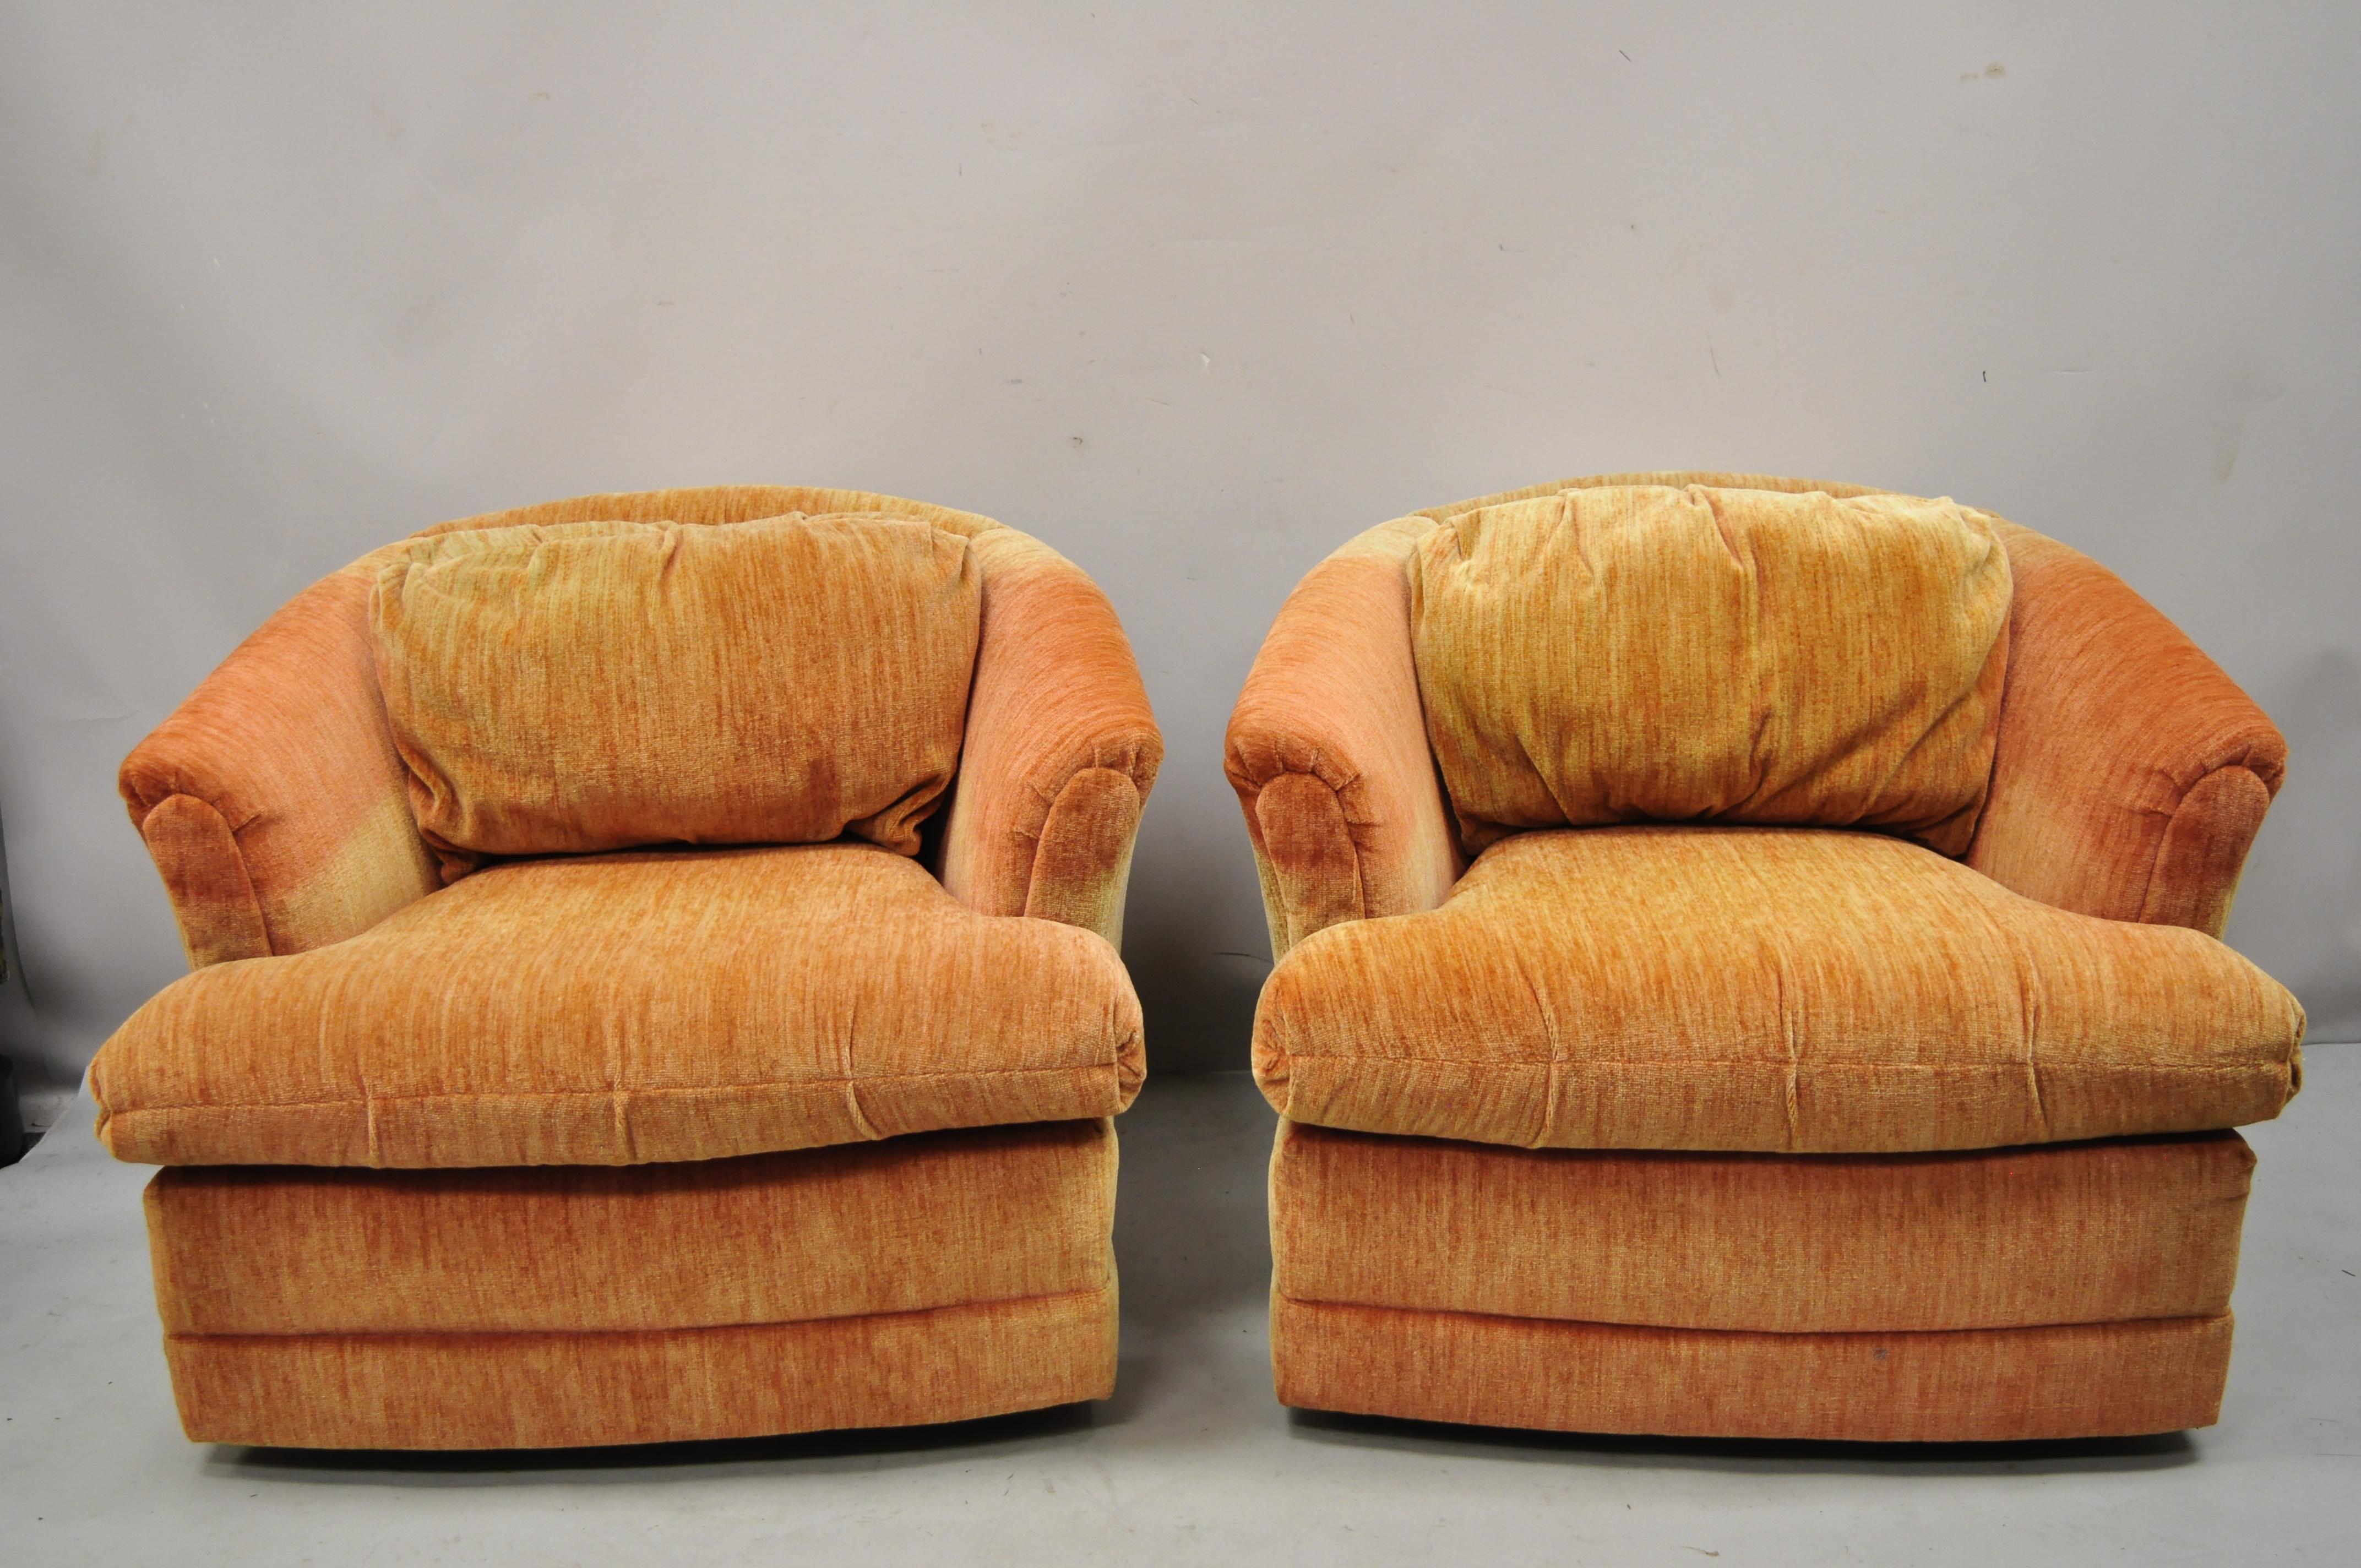 Flexsteel Mid Century Orange Upholstered Swivel Lounge Club Chairs, a Pair In Good Condition For Sale In Philadelphia, PA